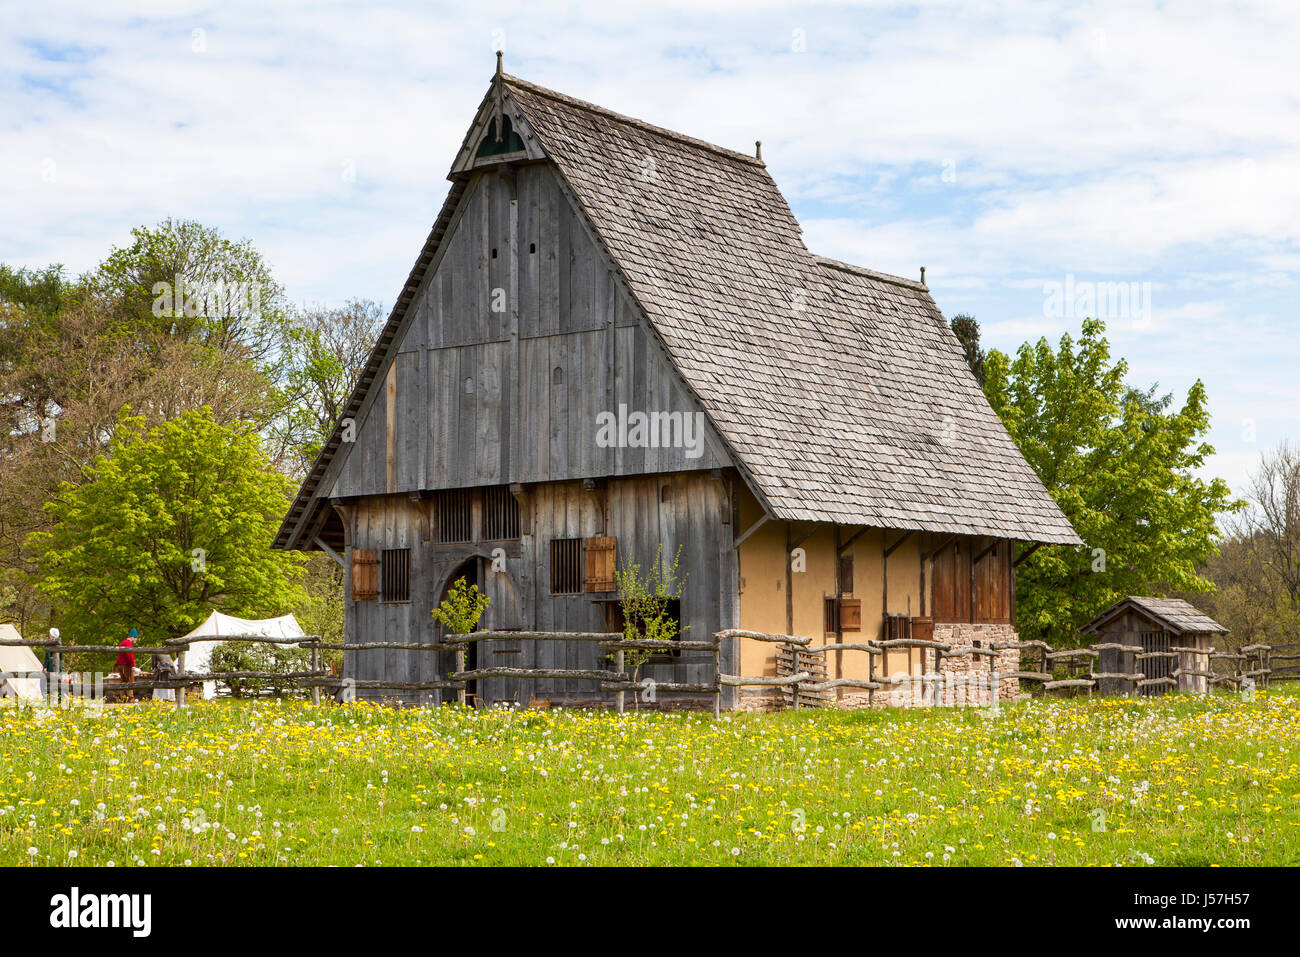 The reconstructed medieval house, Nienover, Bodenfelde, Lower Saxony, Germany Stock Photo